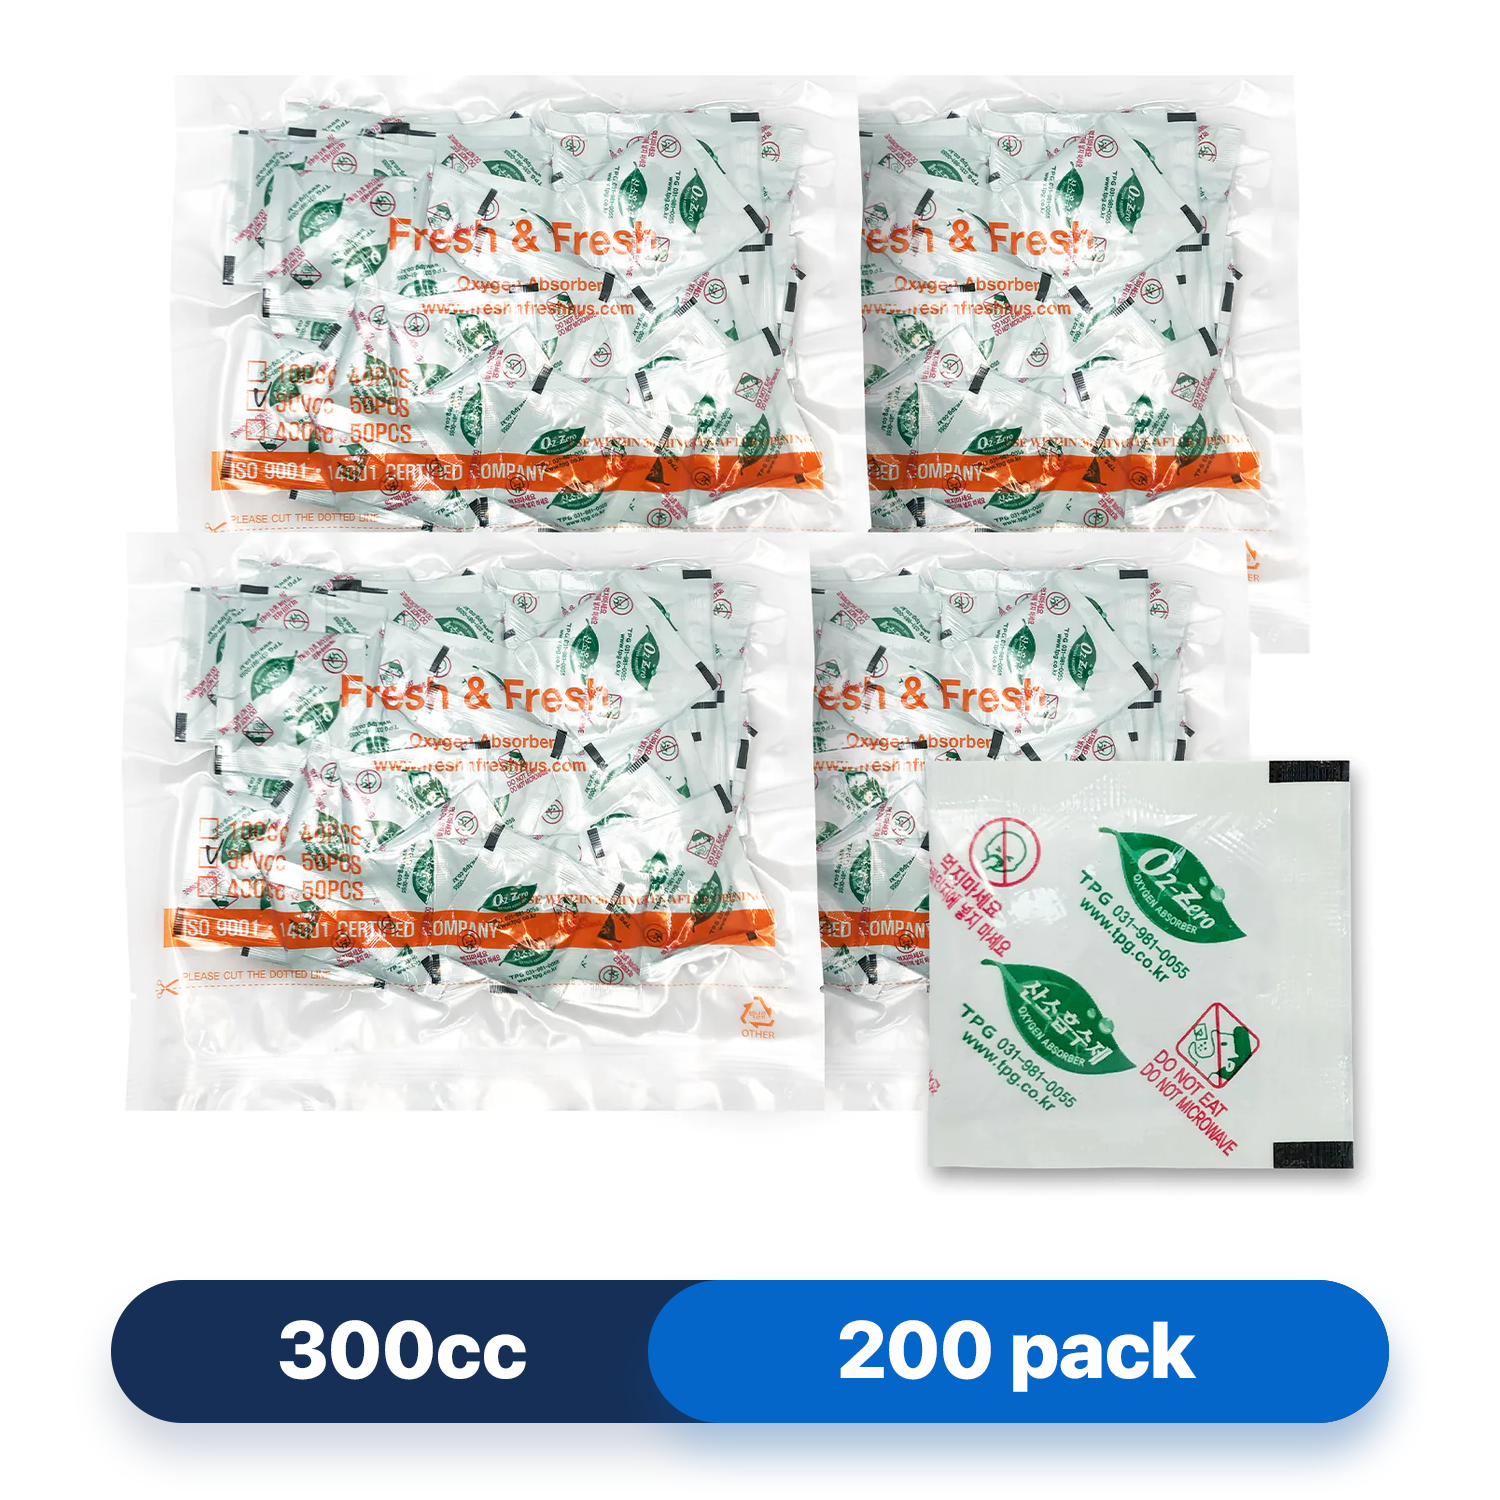 Fresh & Fresh (200 Packs) 300 CC Premium Oxygen Absorbers(4 Bag of 50 Packets) - ISO 9001 Certified Facility Manufactured